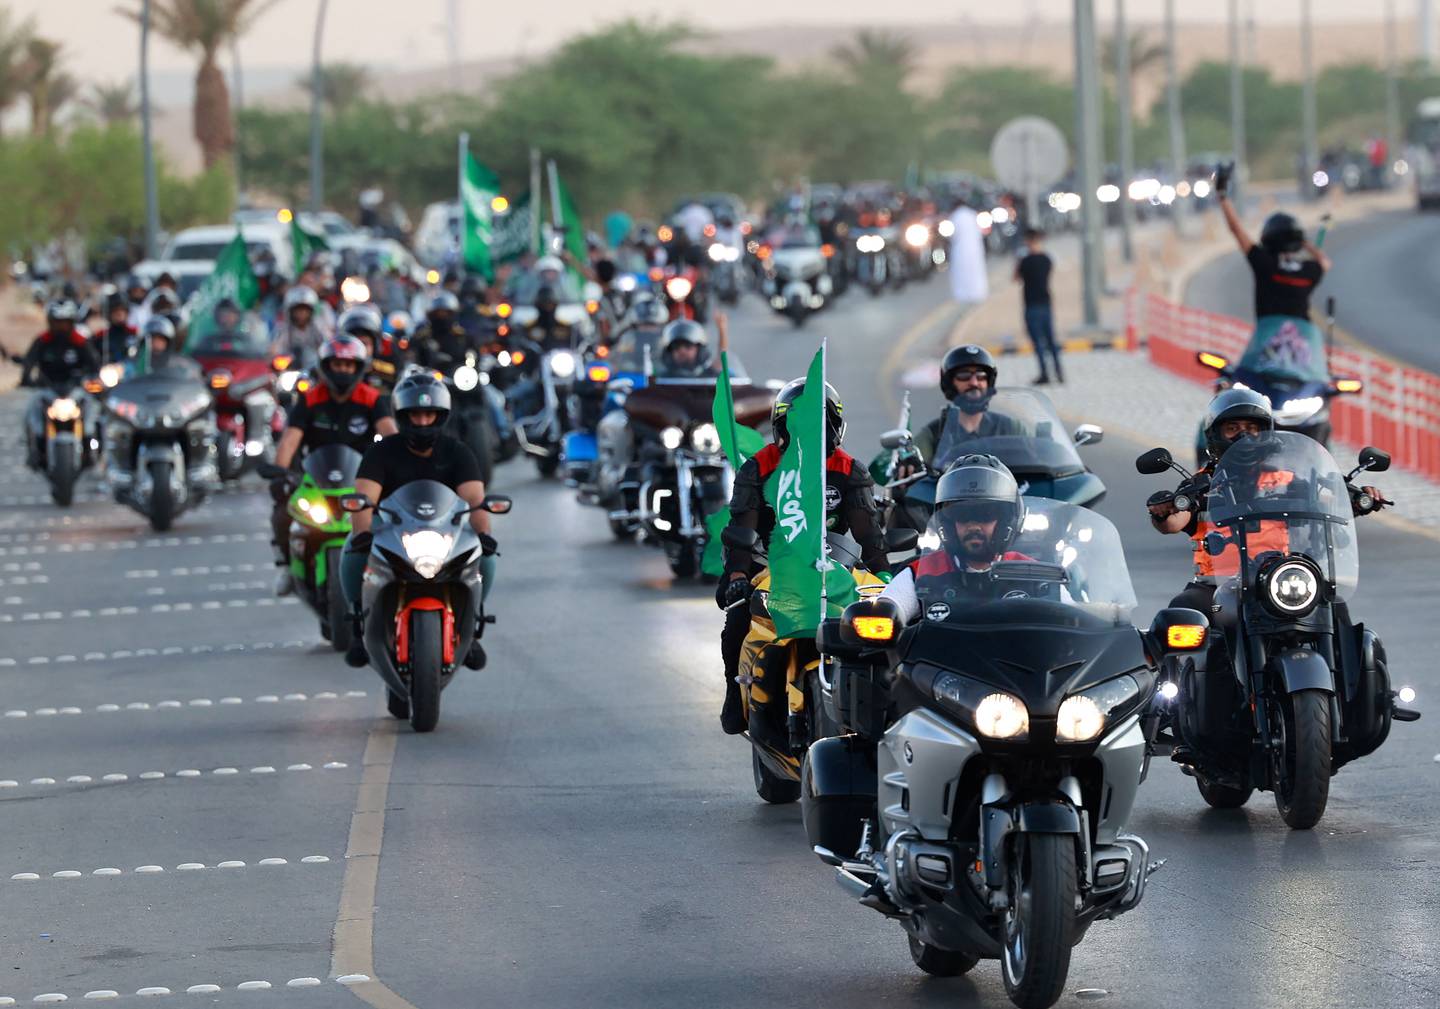 Saudi and expatriate bikers celebrate the country's National Day in Riyadh on Friday. AFP